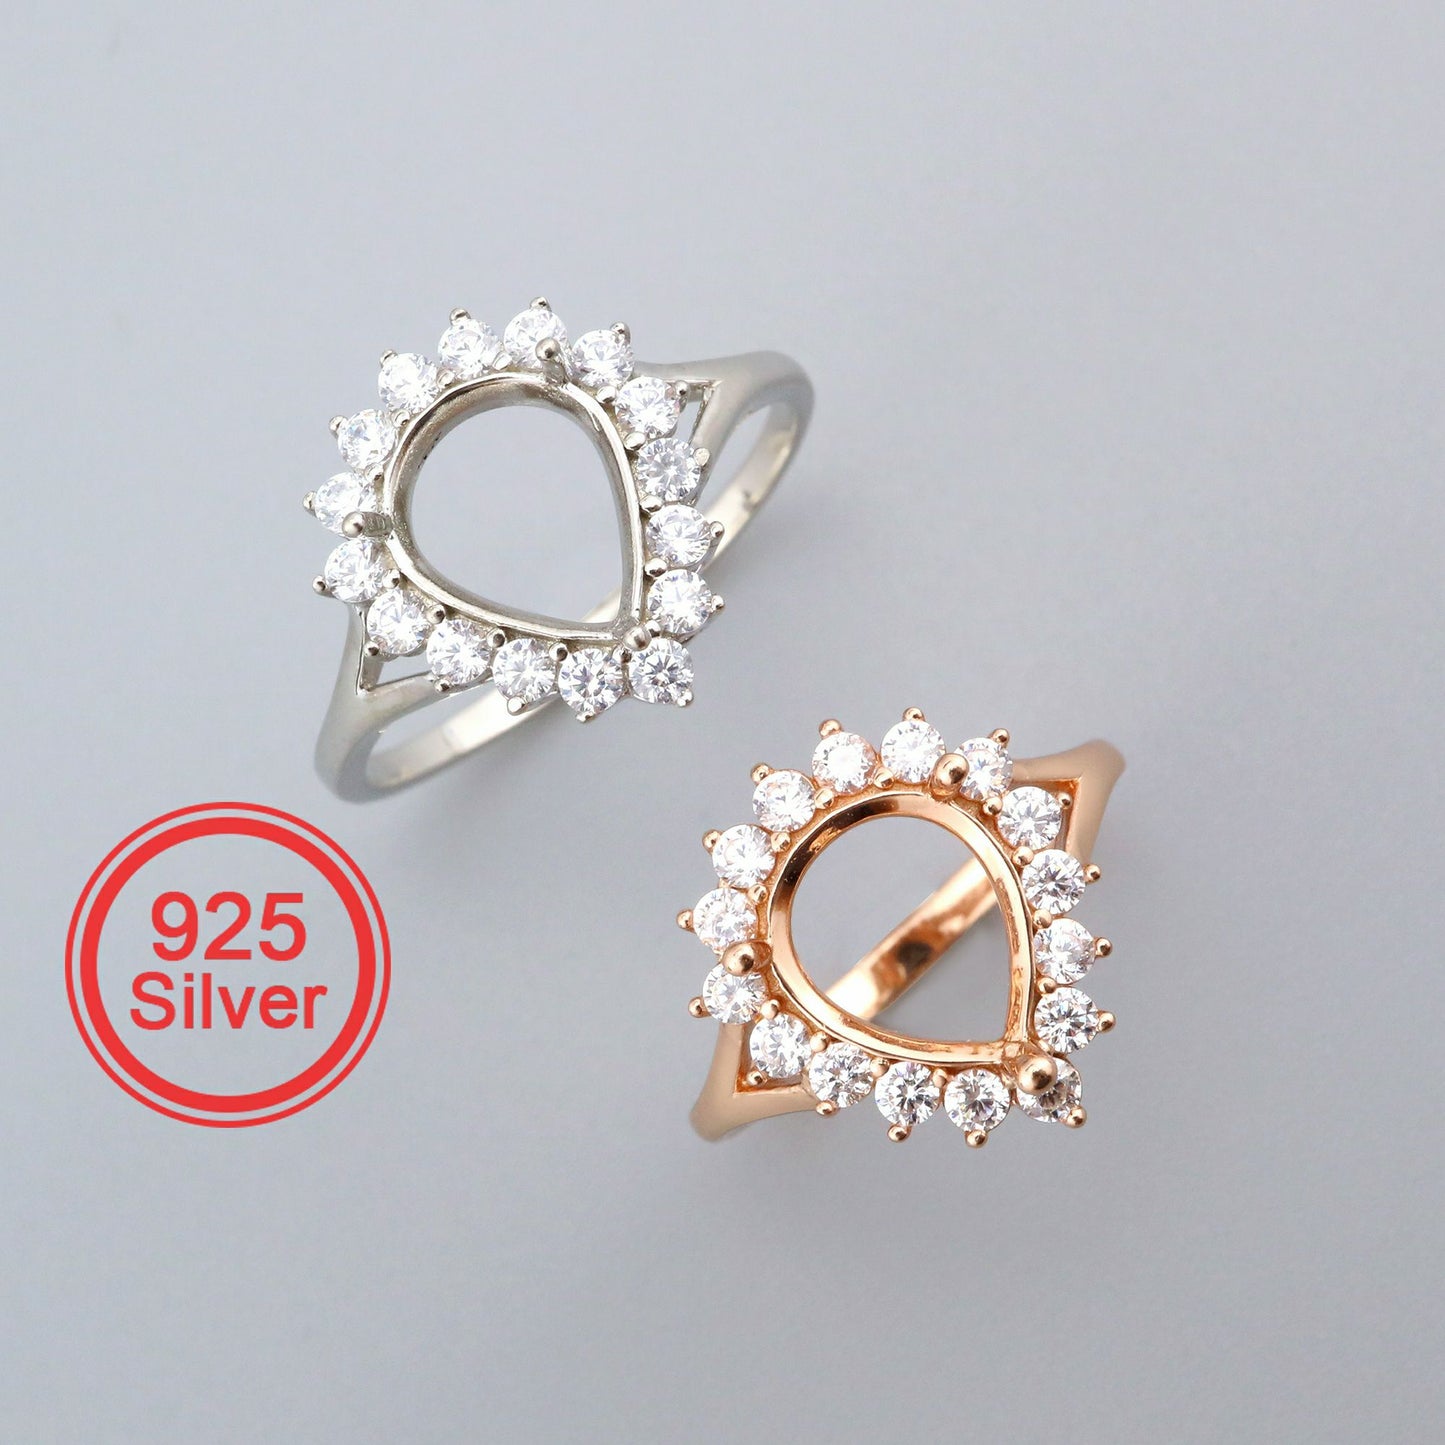 One silver and one rose gold pear halo semi mount setting.